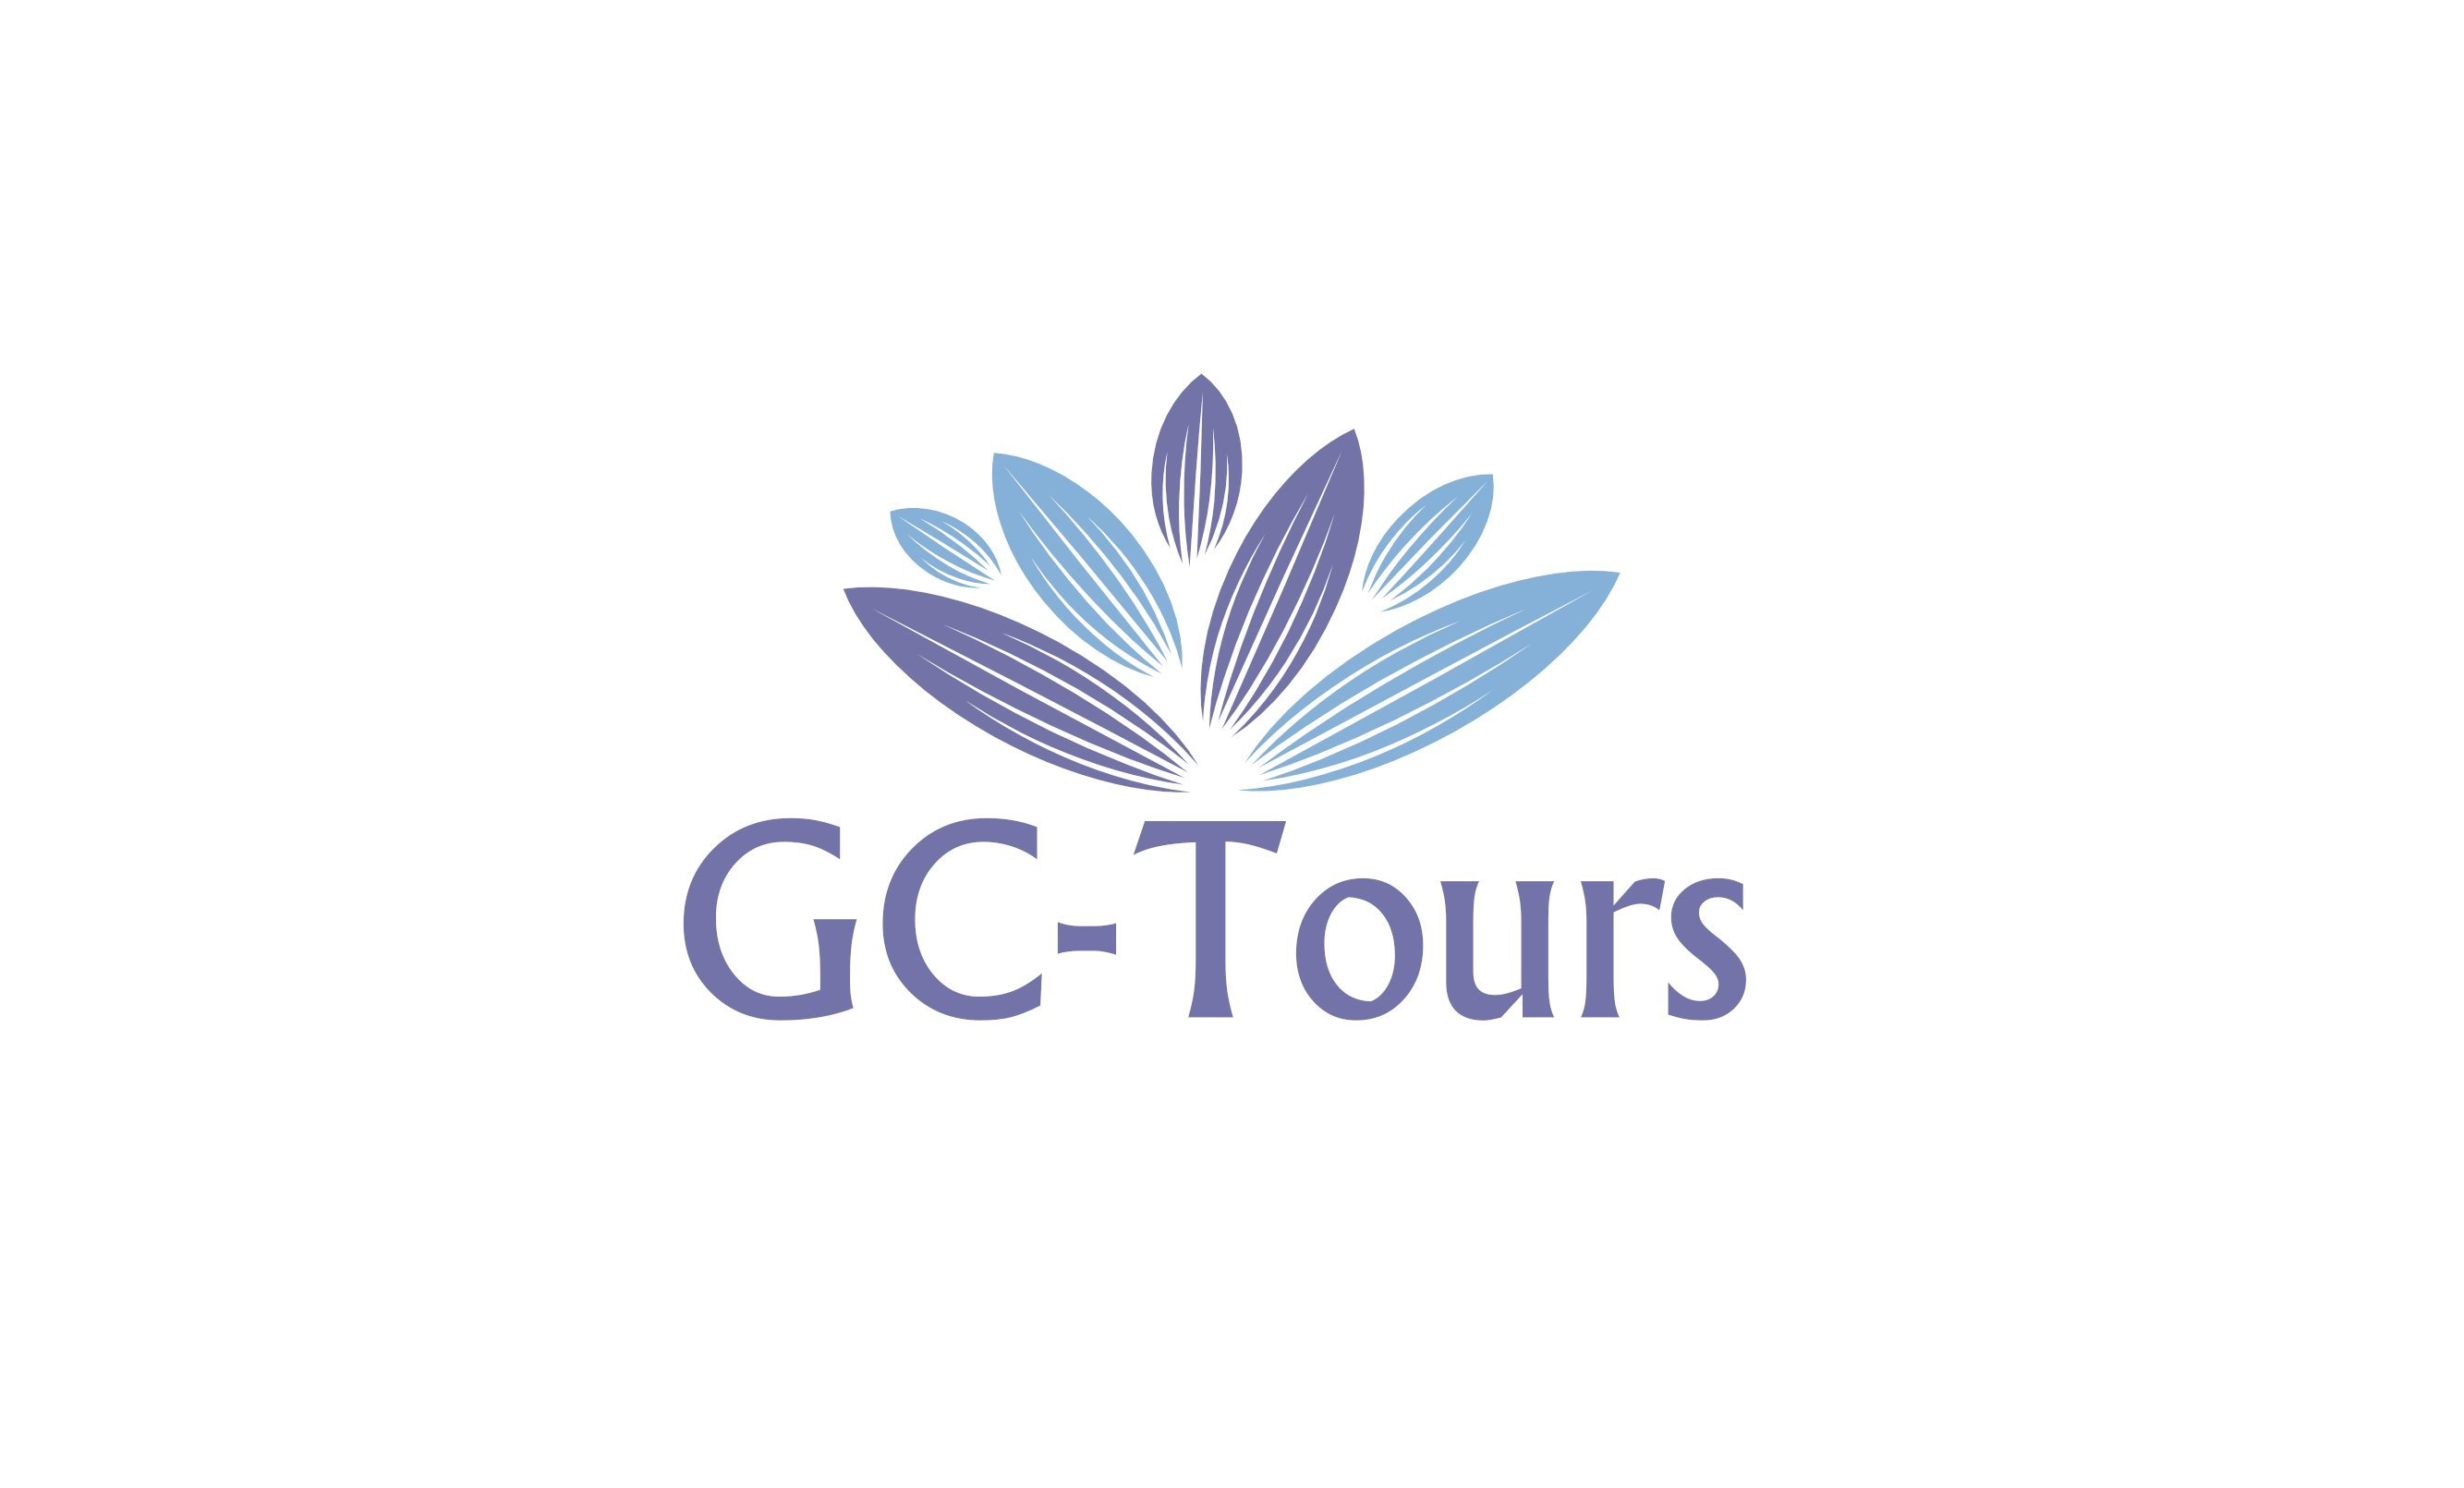 Wir bieten individuelle Touren in Kleingruppen und private Ausflüge auf Gran Canaria an. We offer individual tours in small groups and private excursions on GC.